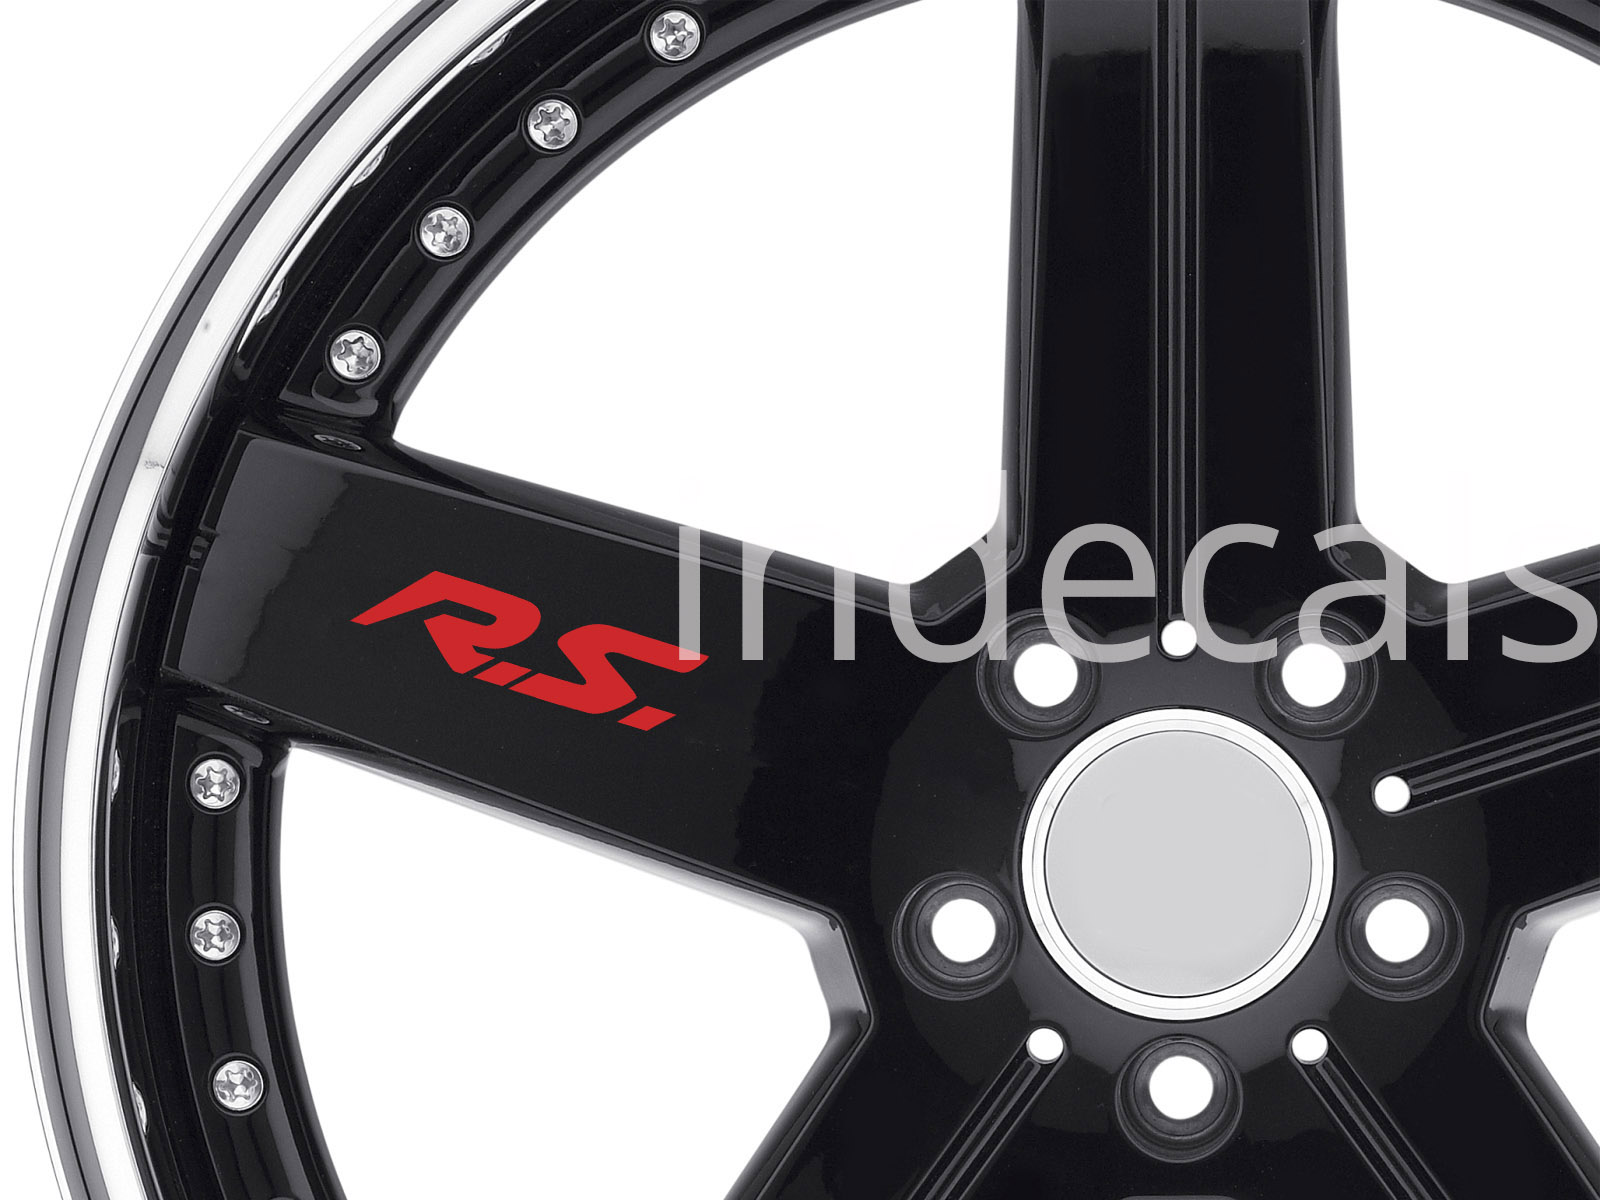 6 x Renault RS Stickers for Wheels - Red